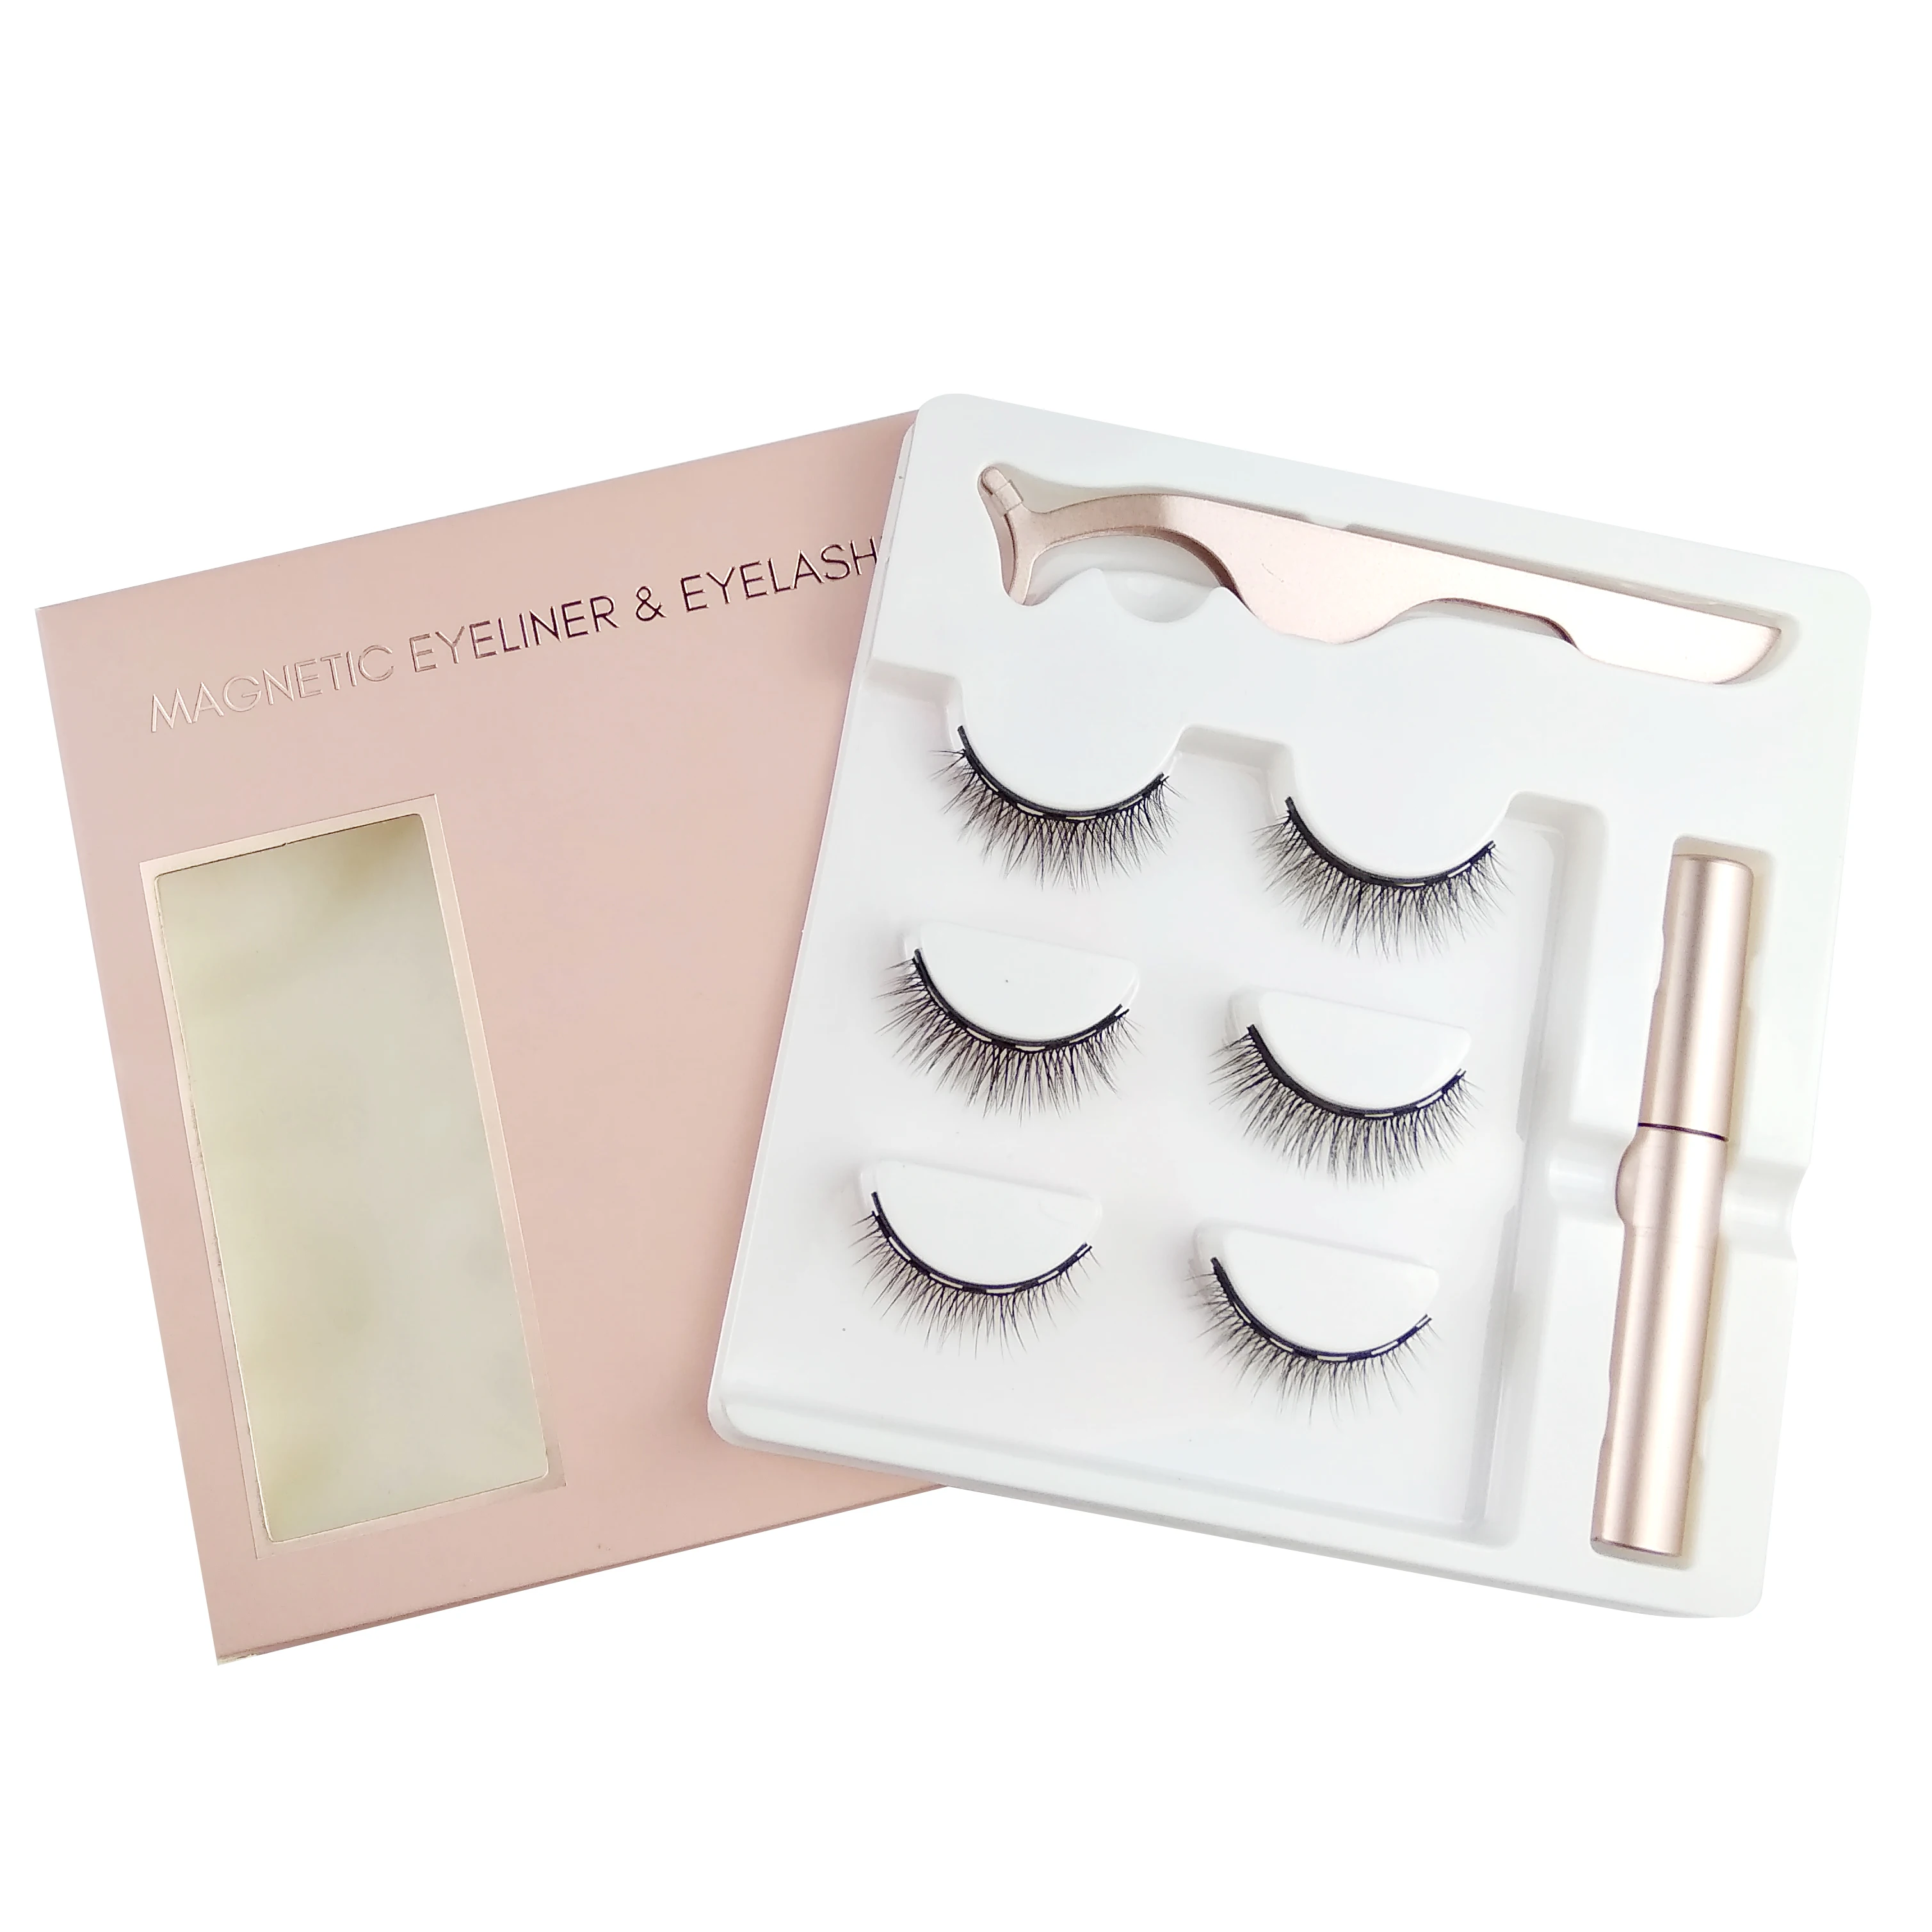 

High quality Private Label Lashes Tweezer Box No Glue Magnetic Eyeliner And Eyelashes Kit, Natural black& colorful